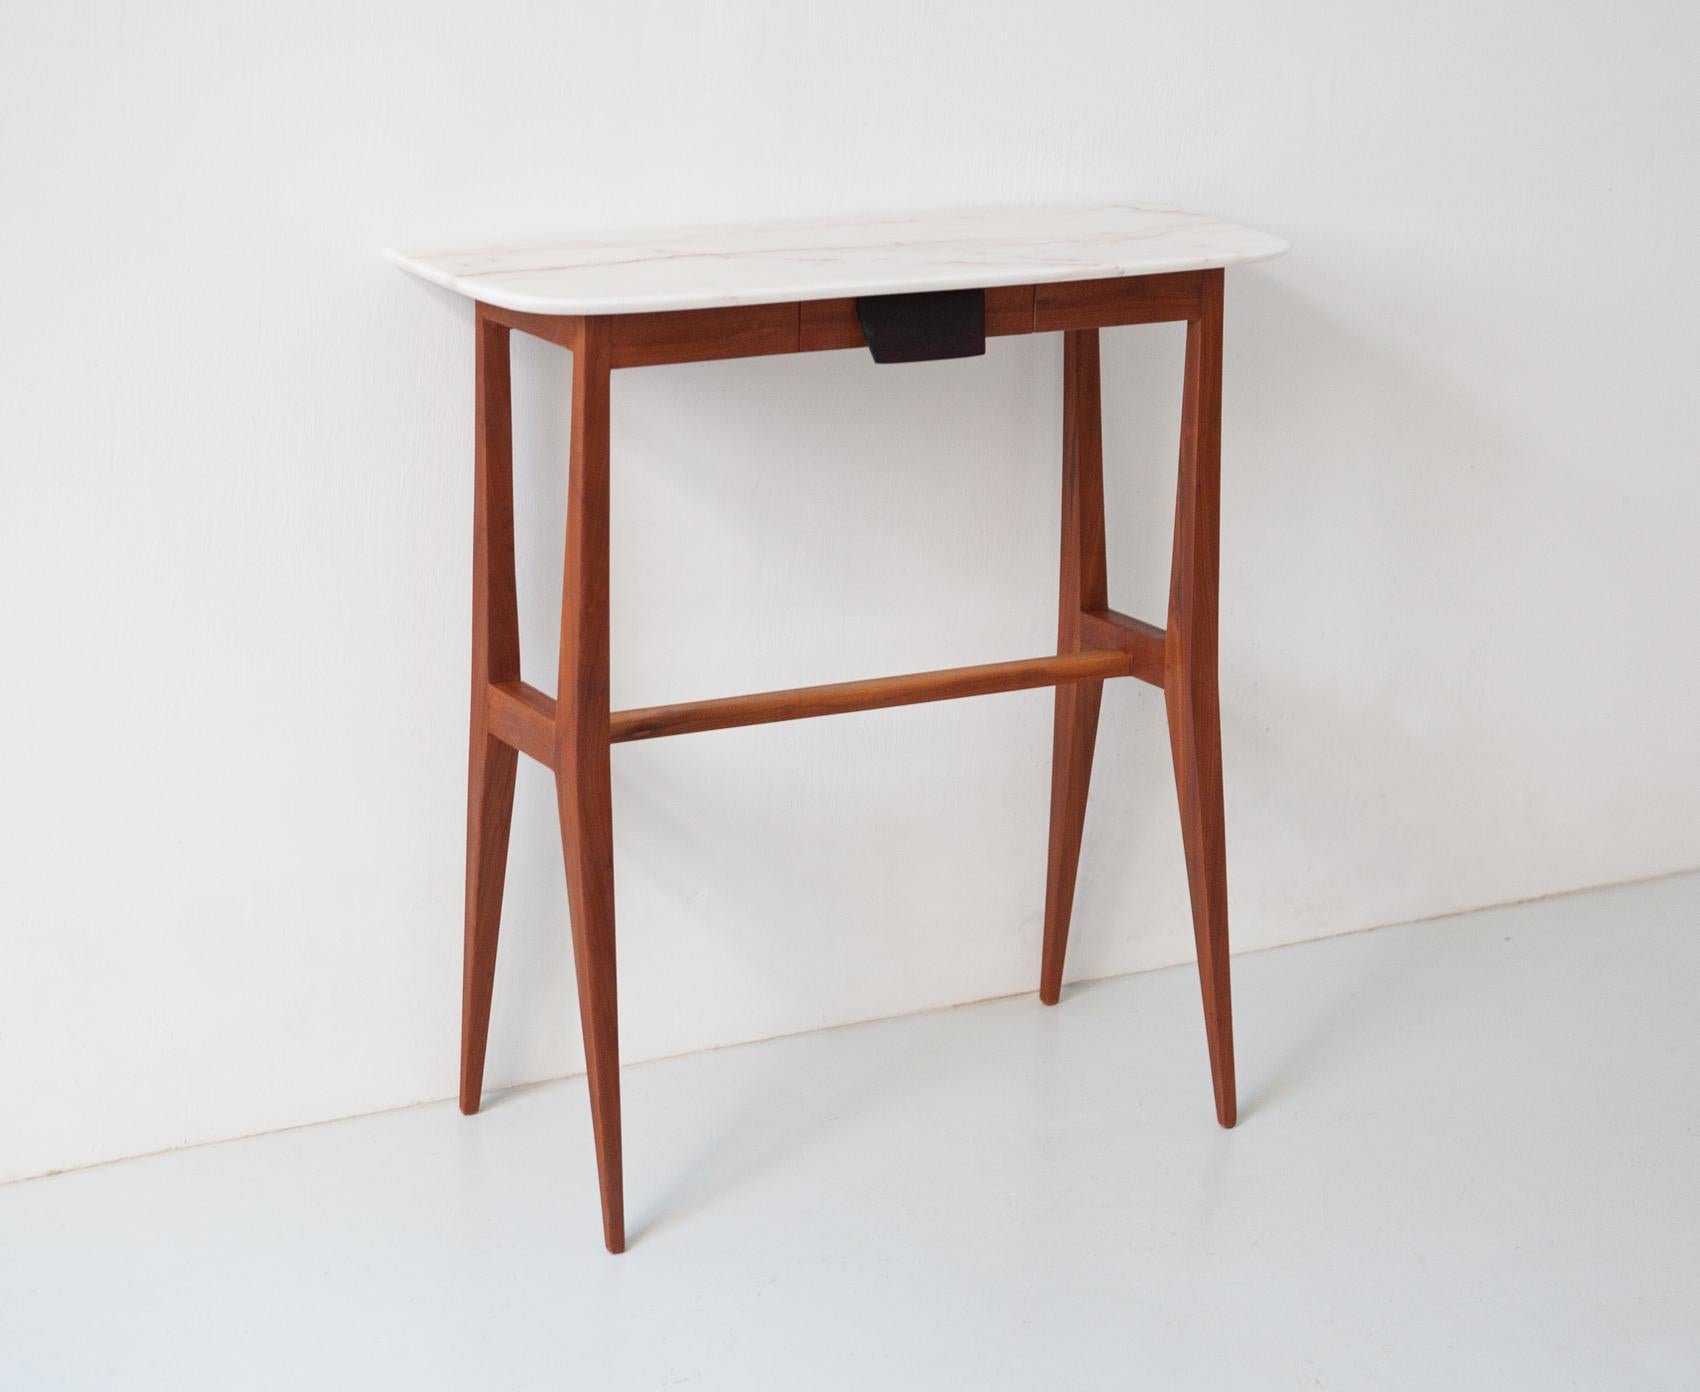 Mid-20th Century Italian Console Table, Mahogany Wood with Marble Top, 1950s